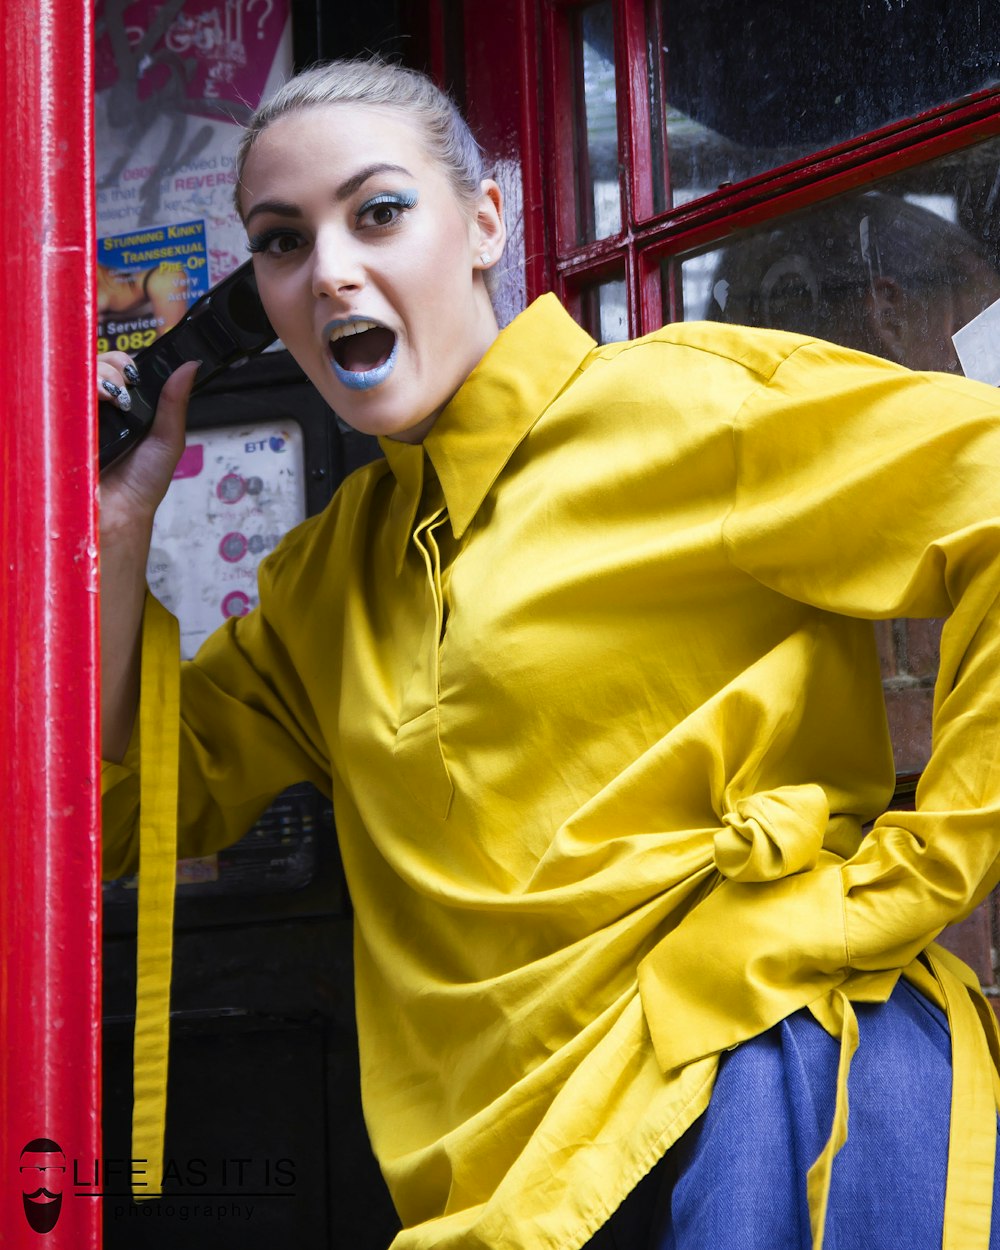 woman in yellow button up shirt standing beside red telephone booth